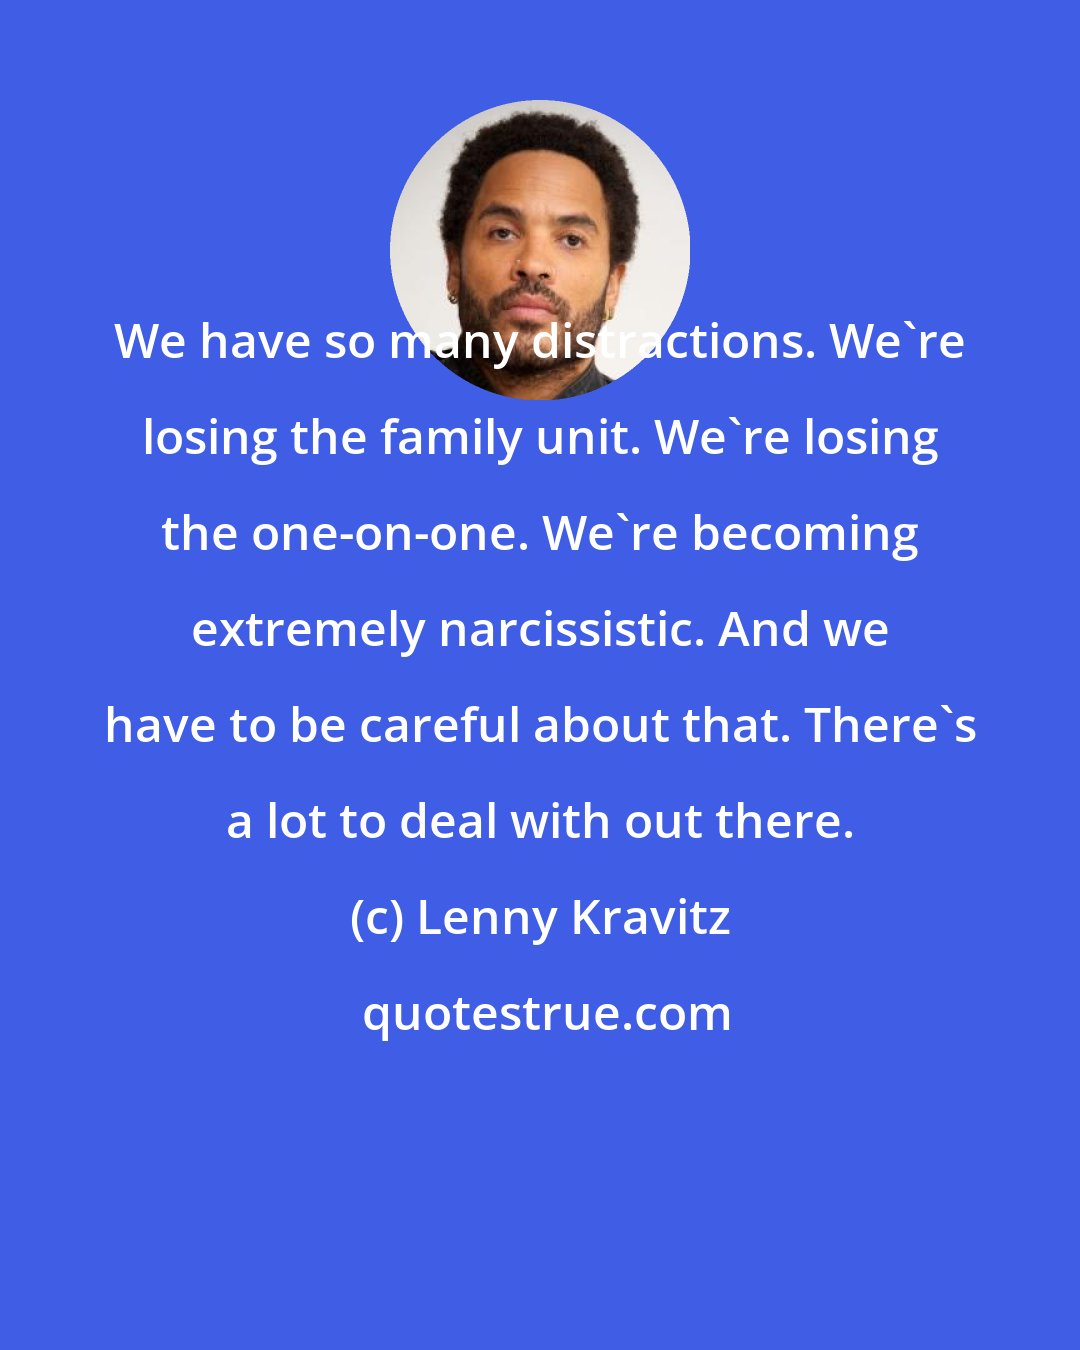 Lenny Kravitz: We have so many distractions. We're losing the family unit. We're losing the one-on-one. We're becoming extremely narcissistic. And we have to be careful about that. There's a lot to deal with out there.